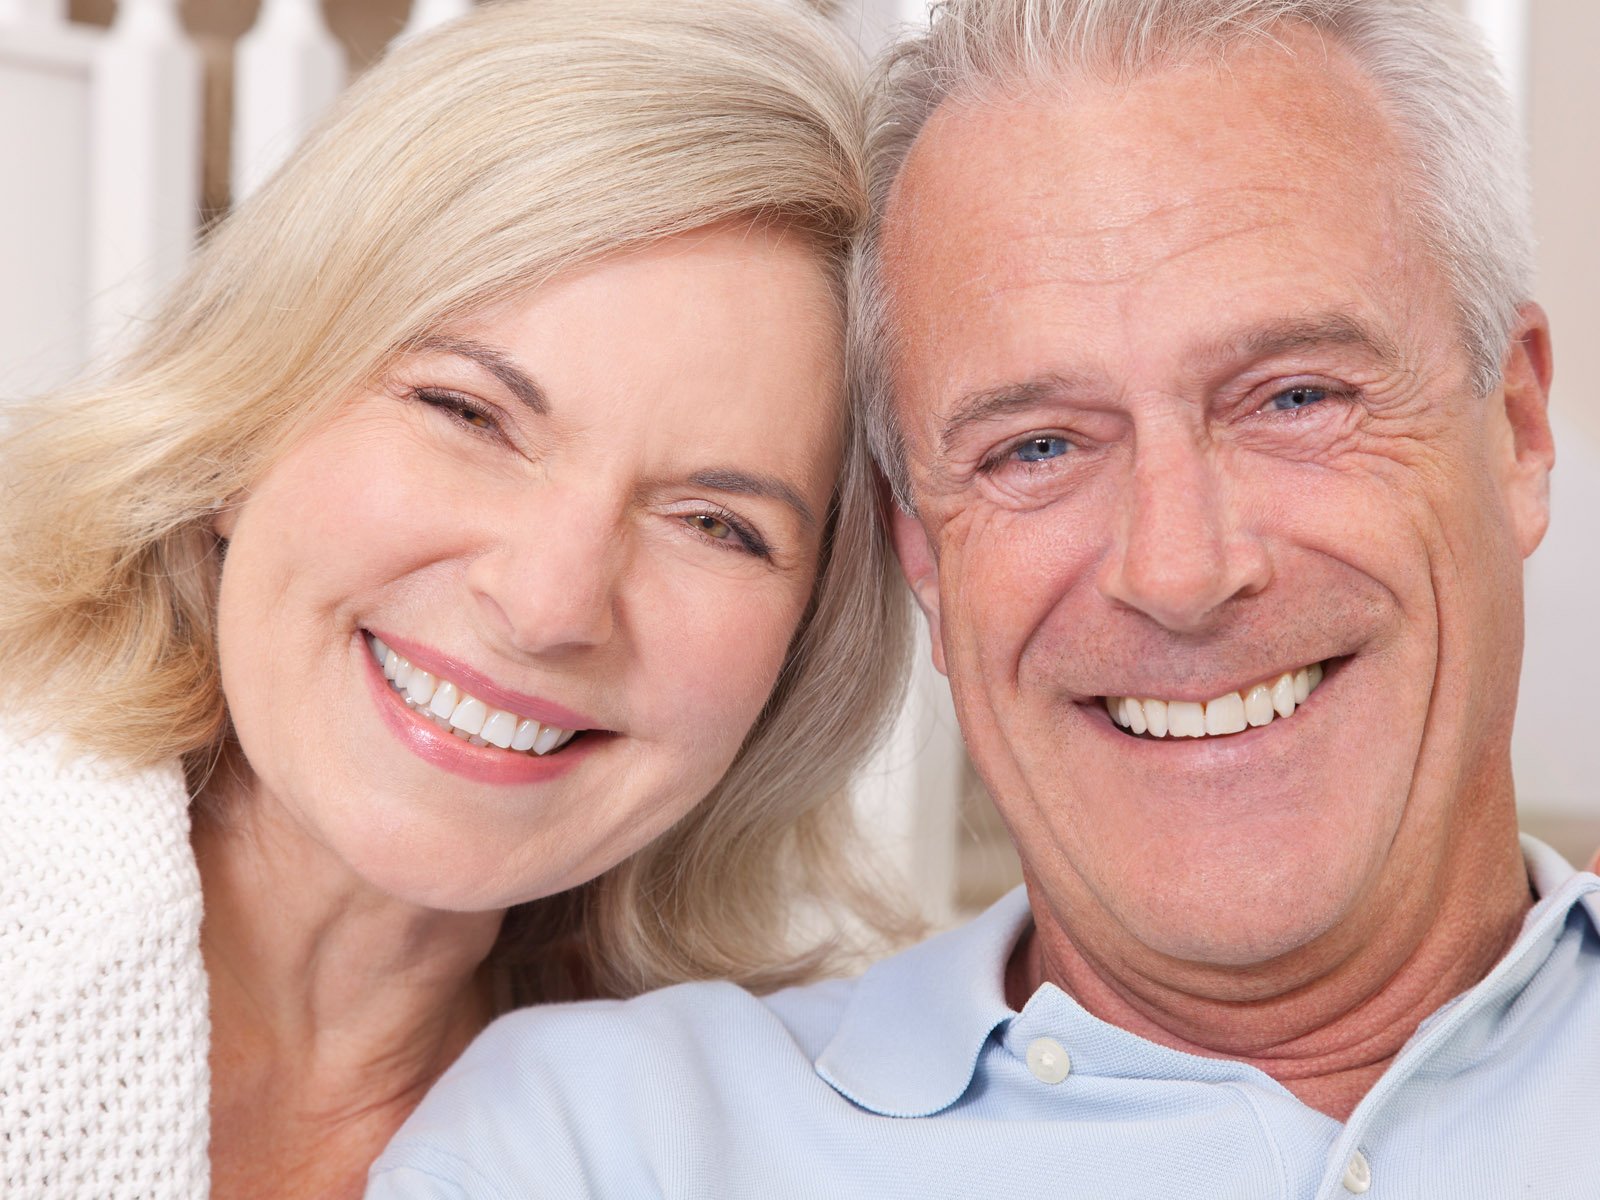 How Can Aging Impact Your Oral Health?